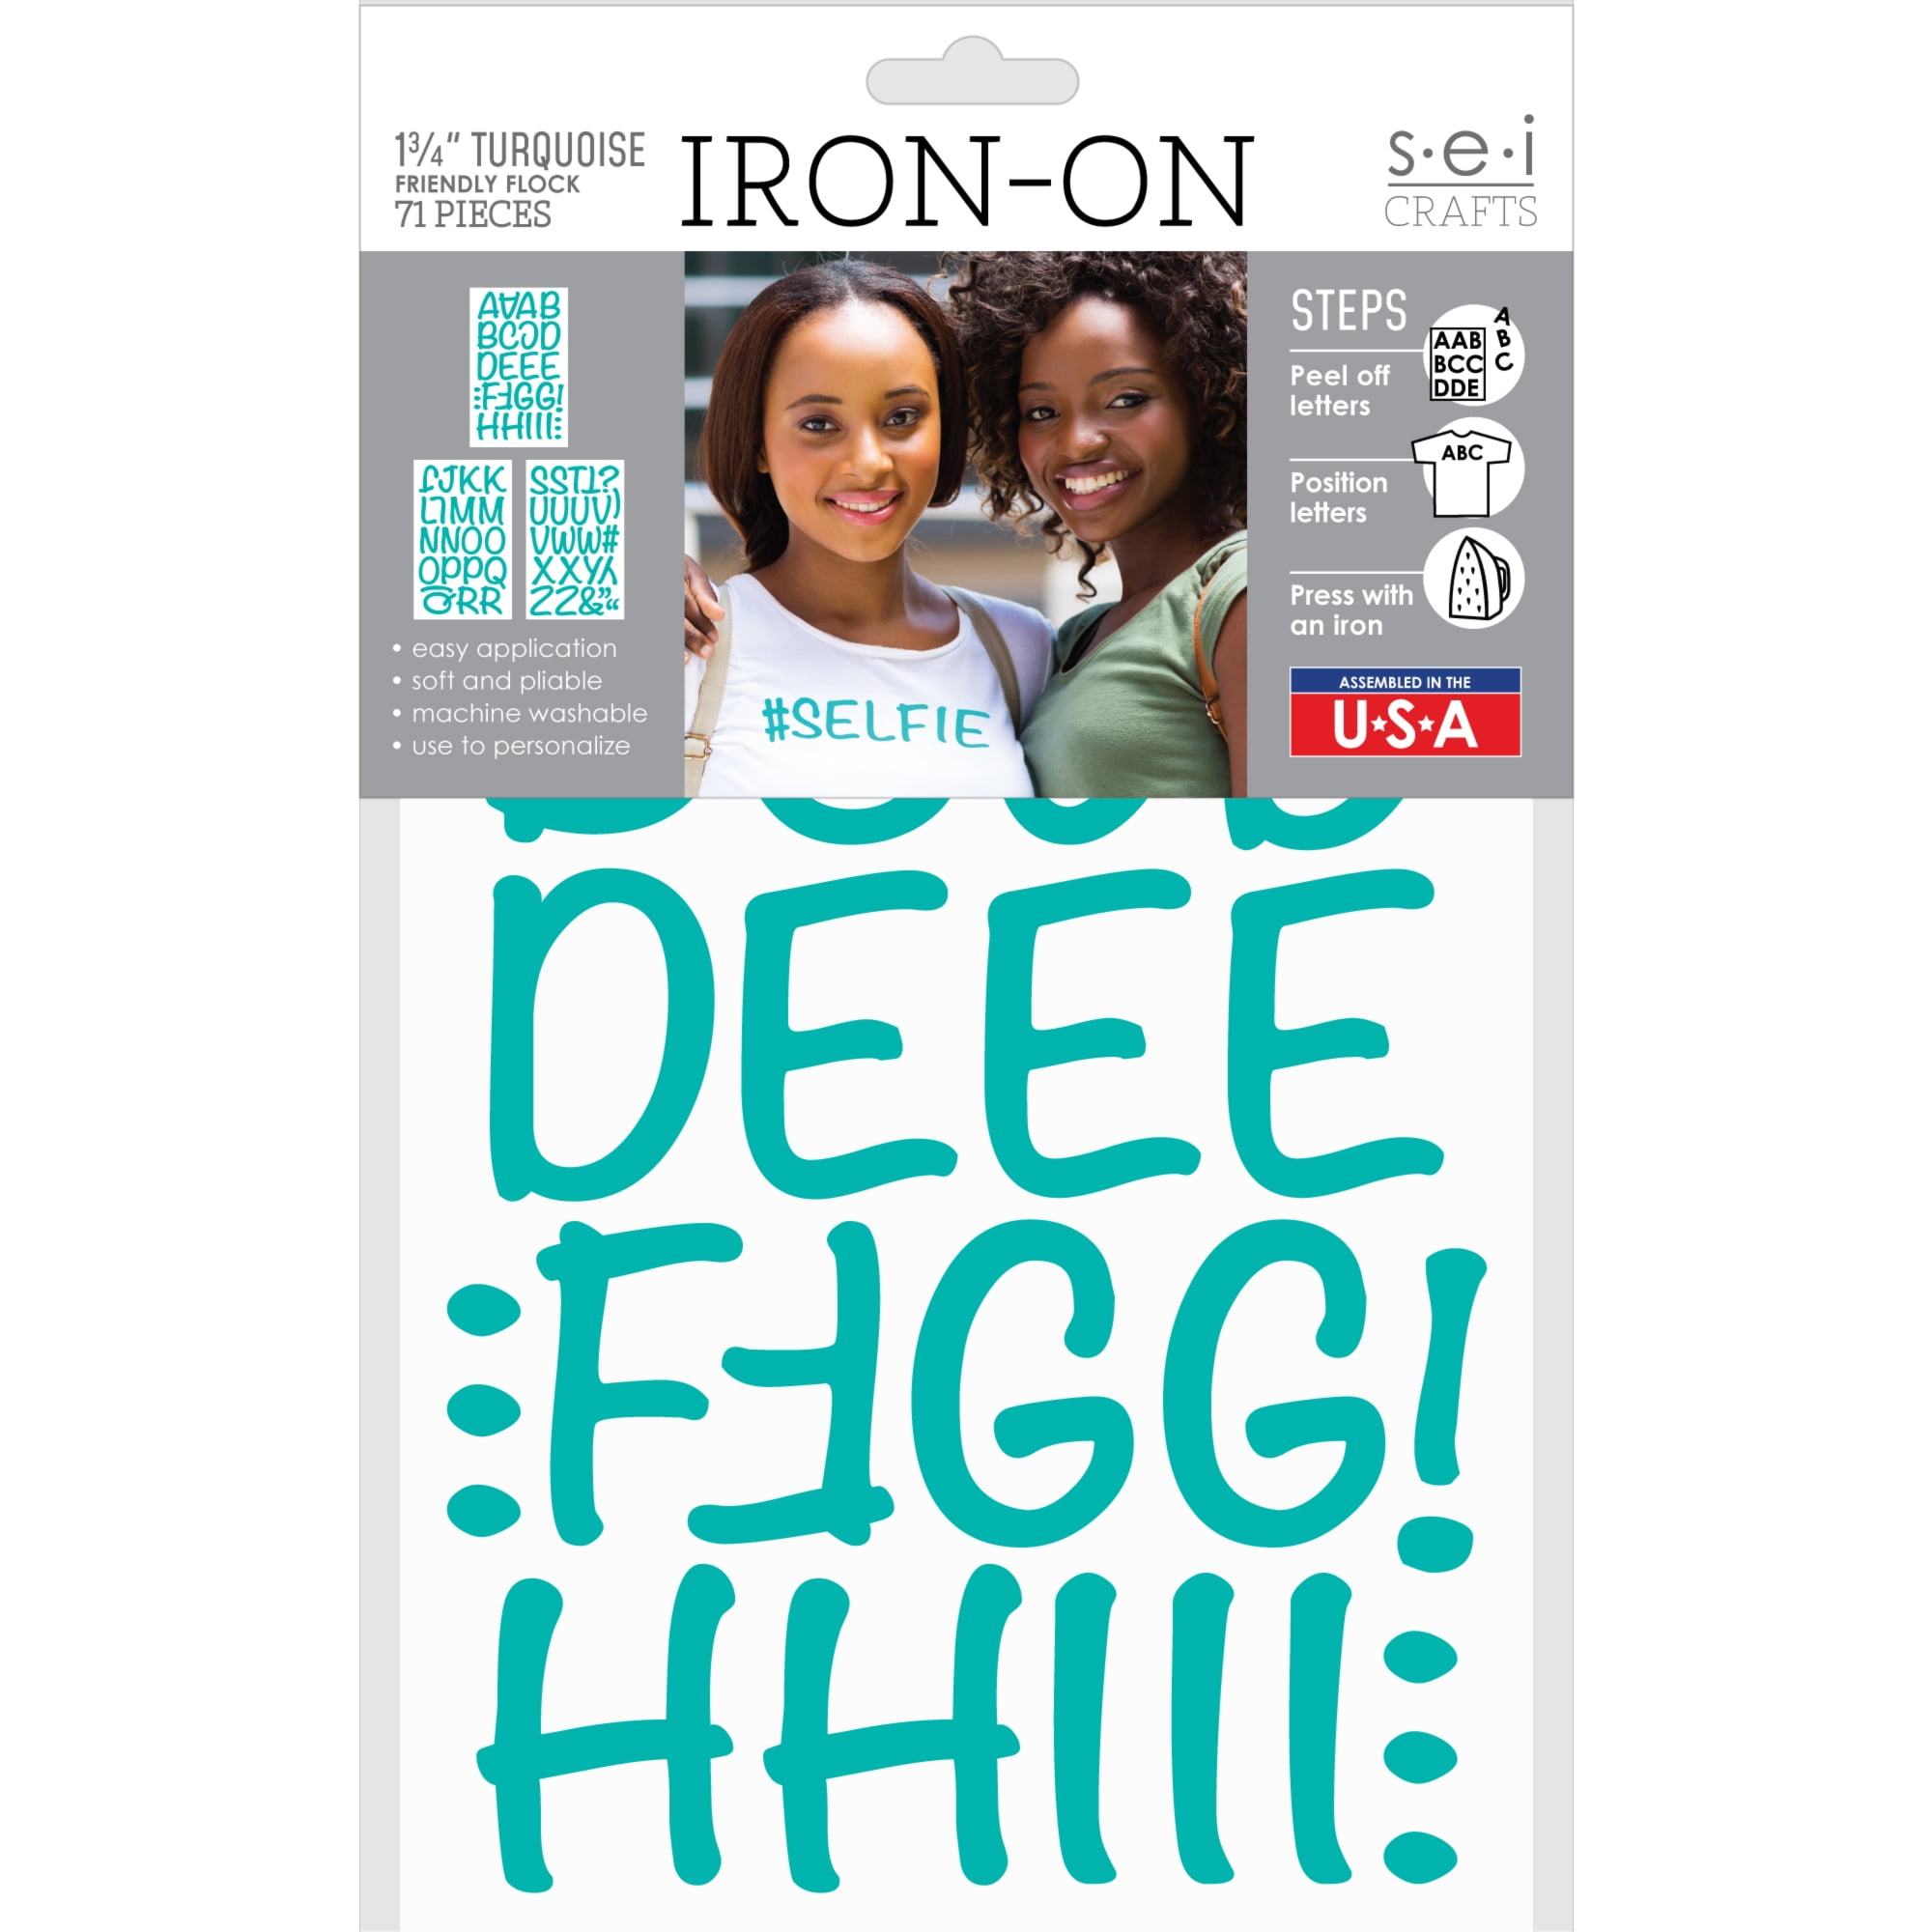 Jolee's Iron-On Letters 1.5-Turquoise